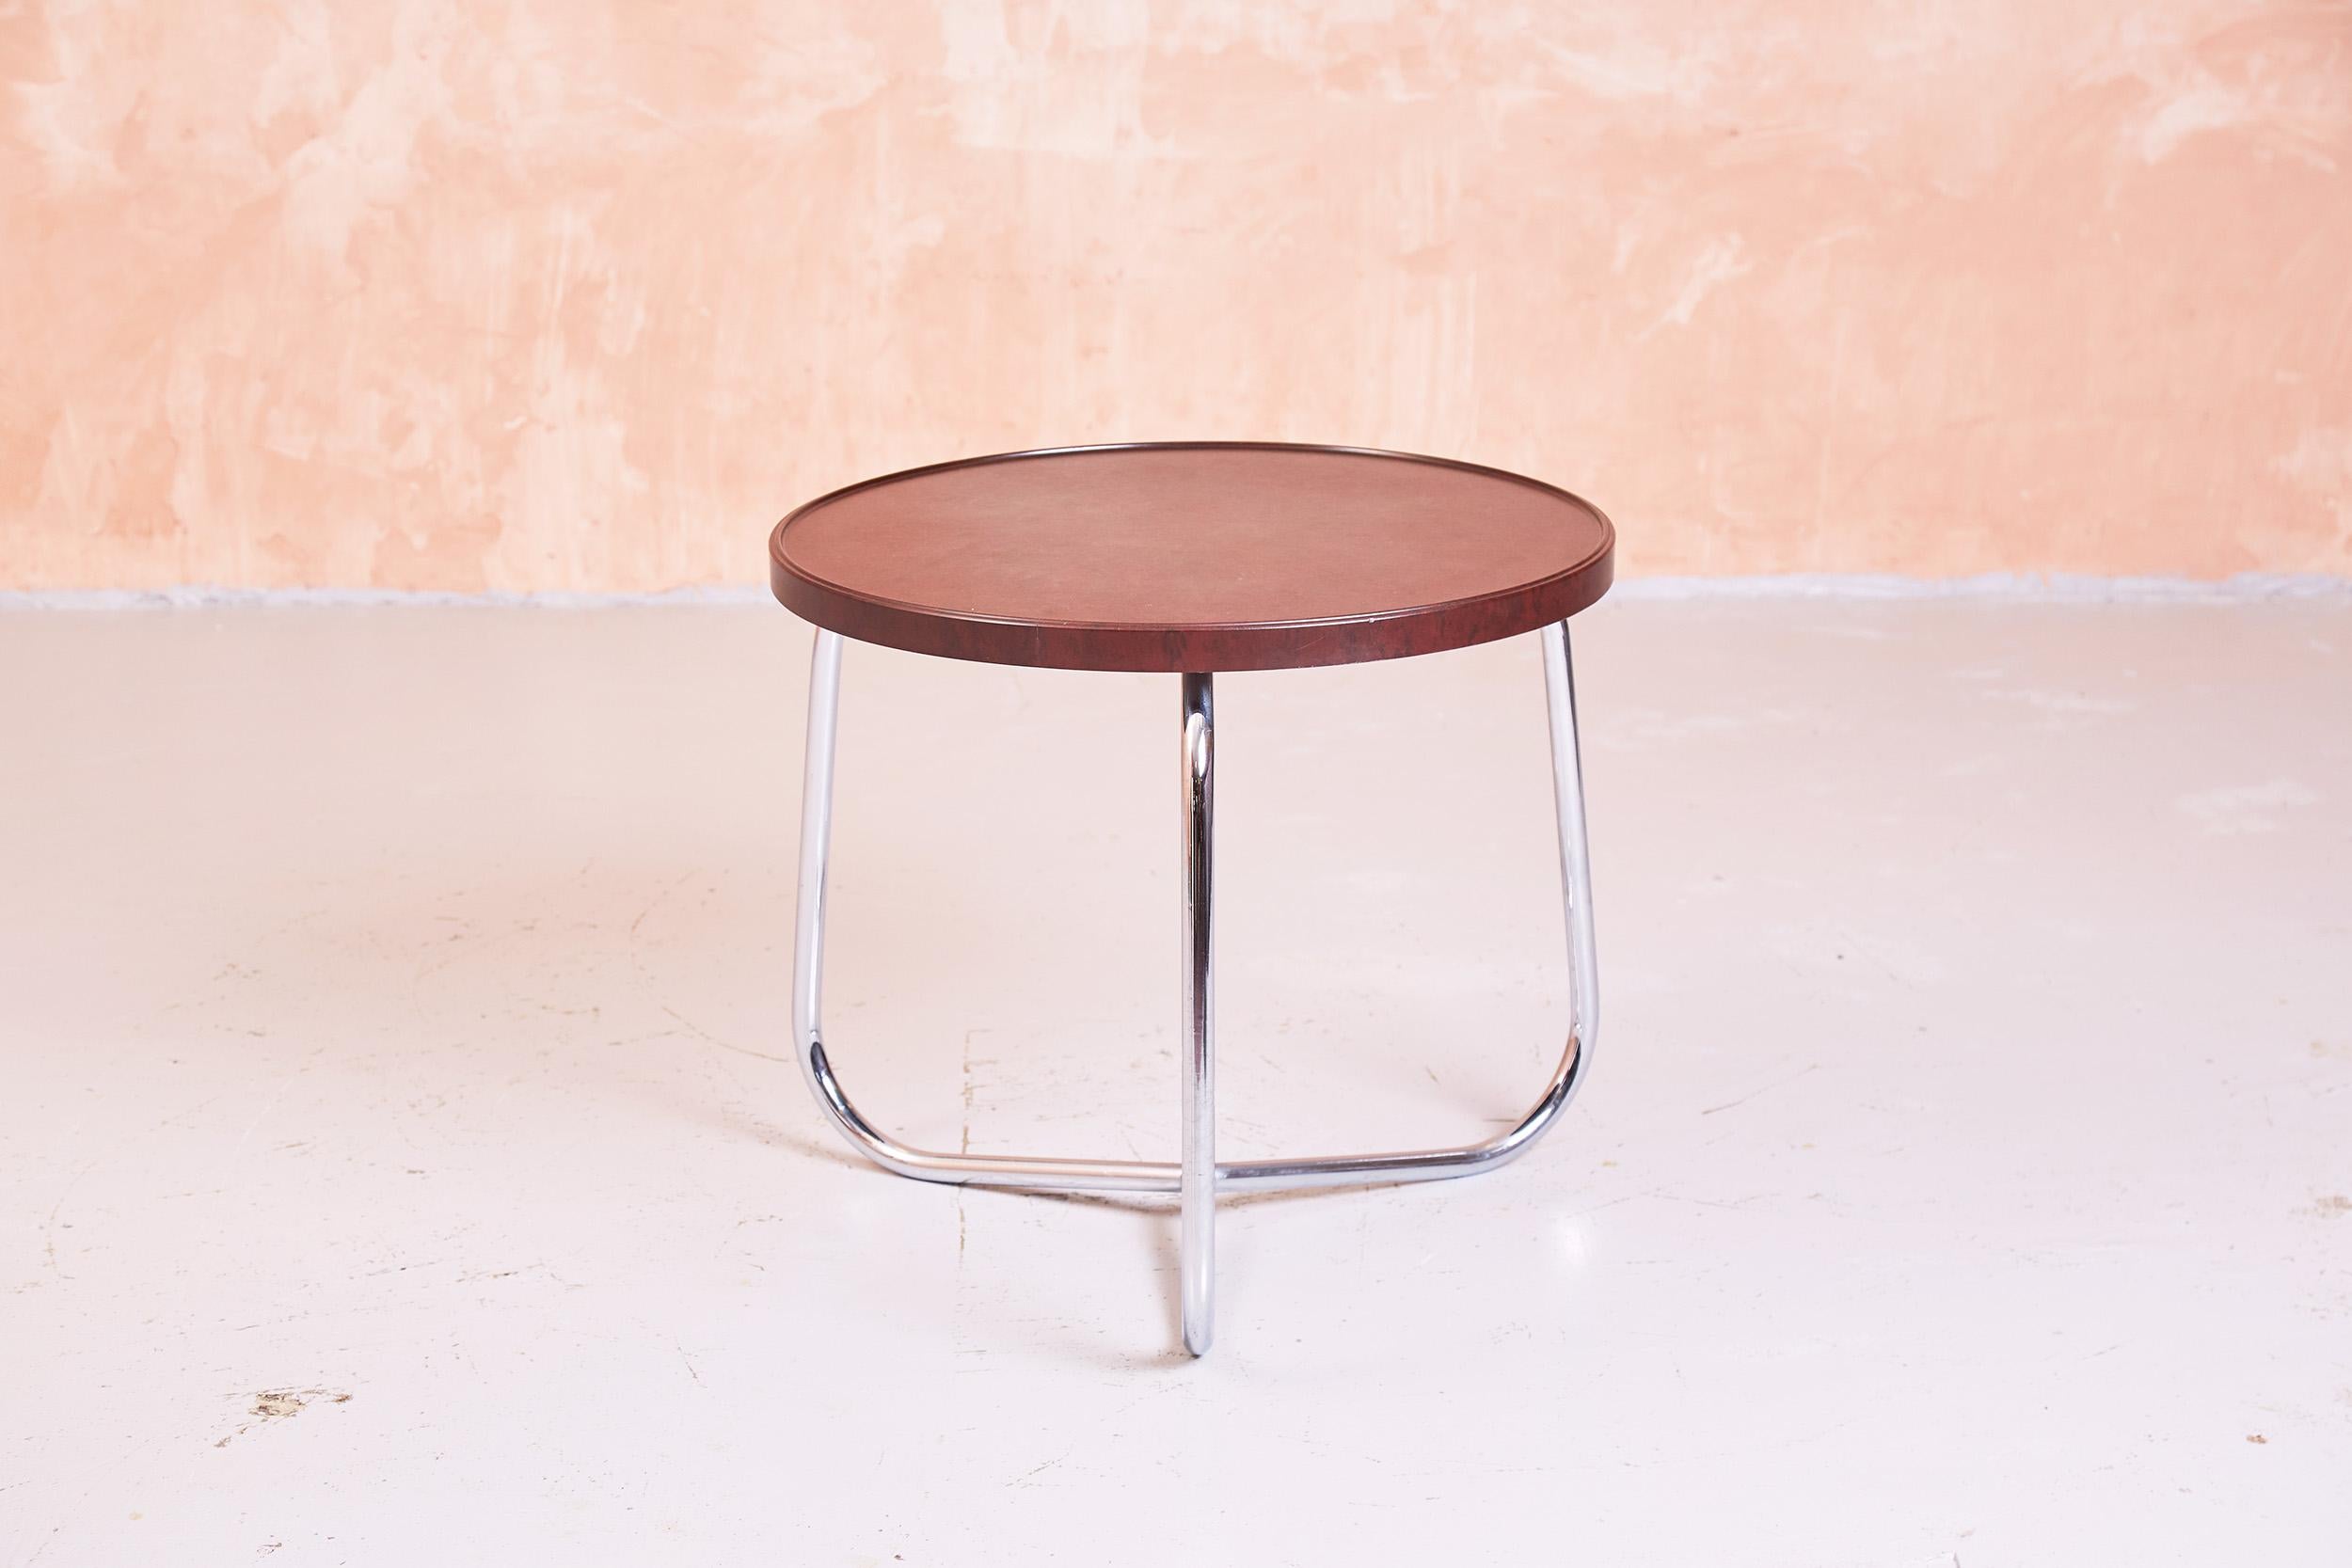 Bakelite Mid Century Round Side Table with Chrome Base Airborne Furniture, 1940s 1